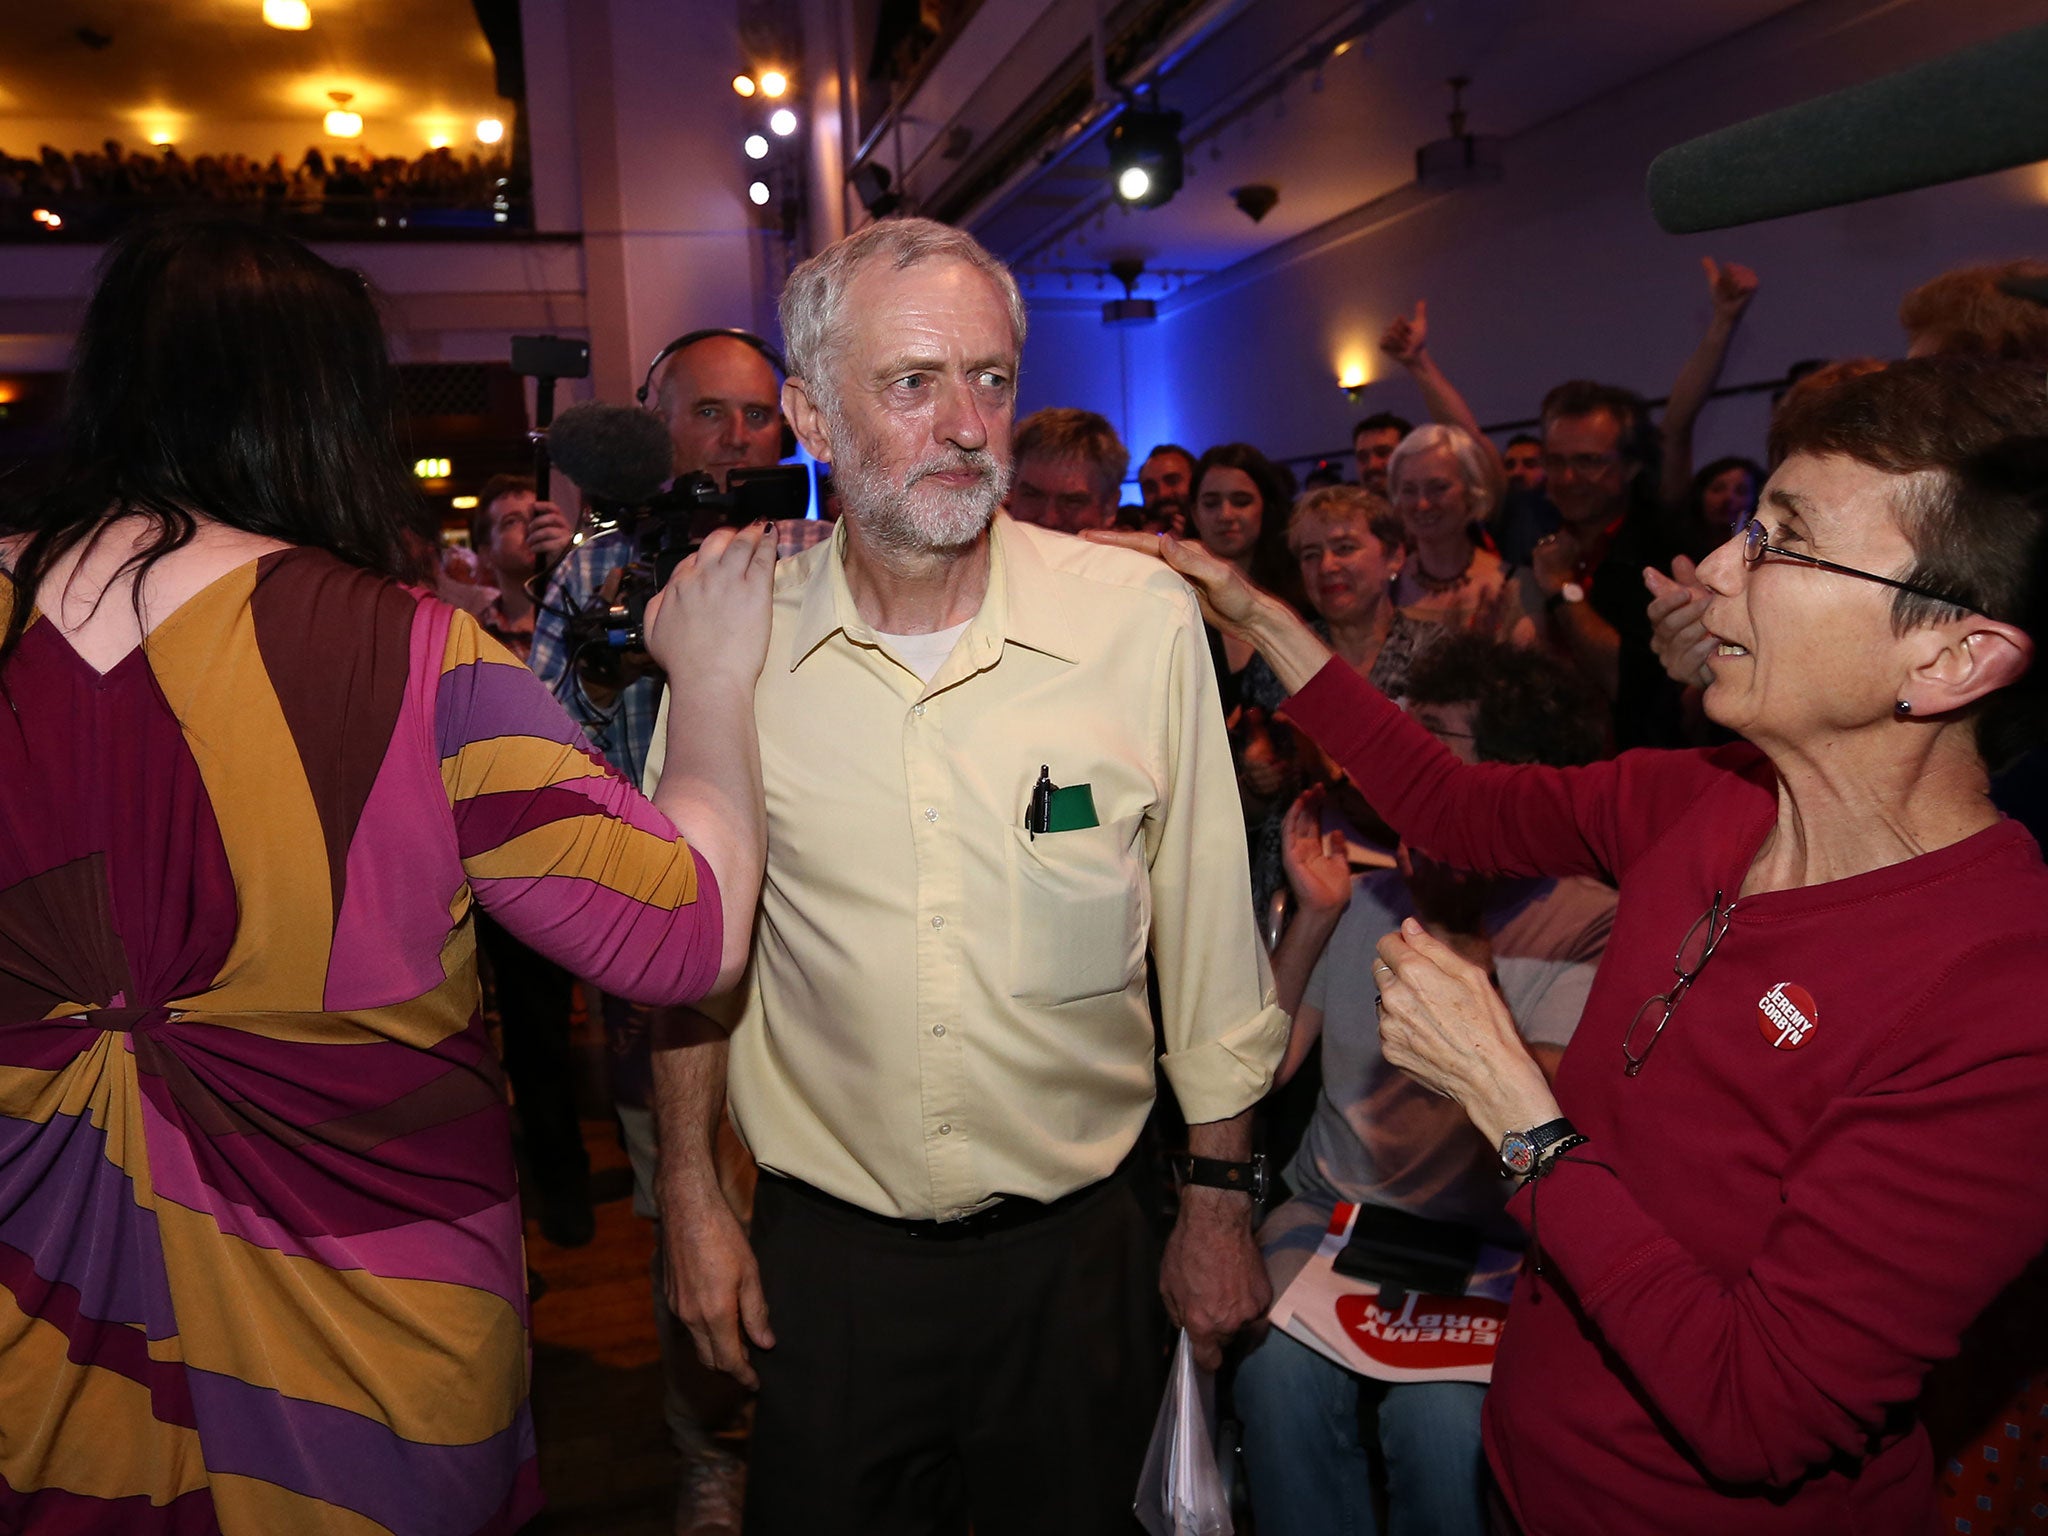 Jeremy Corbyn greeted by supporters in at a Labour leadership rally Camden, North London